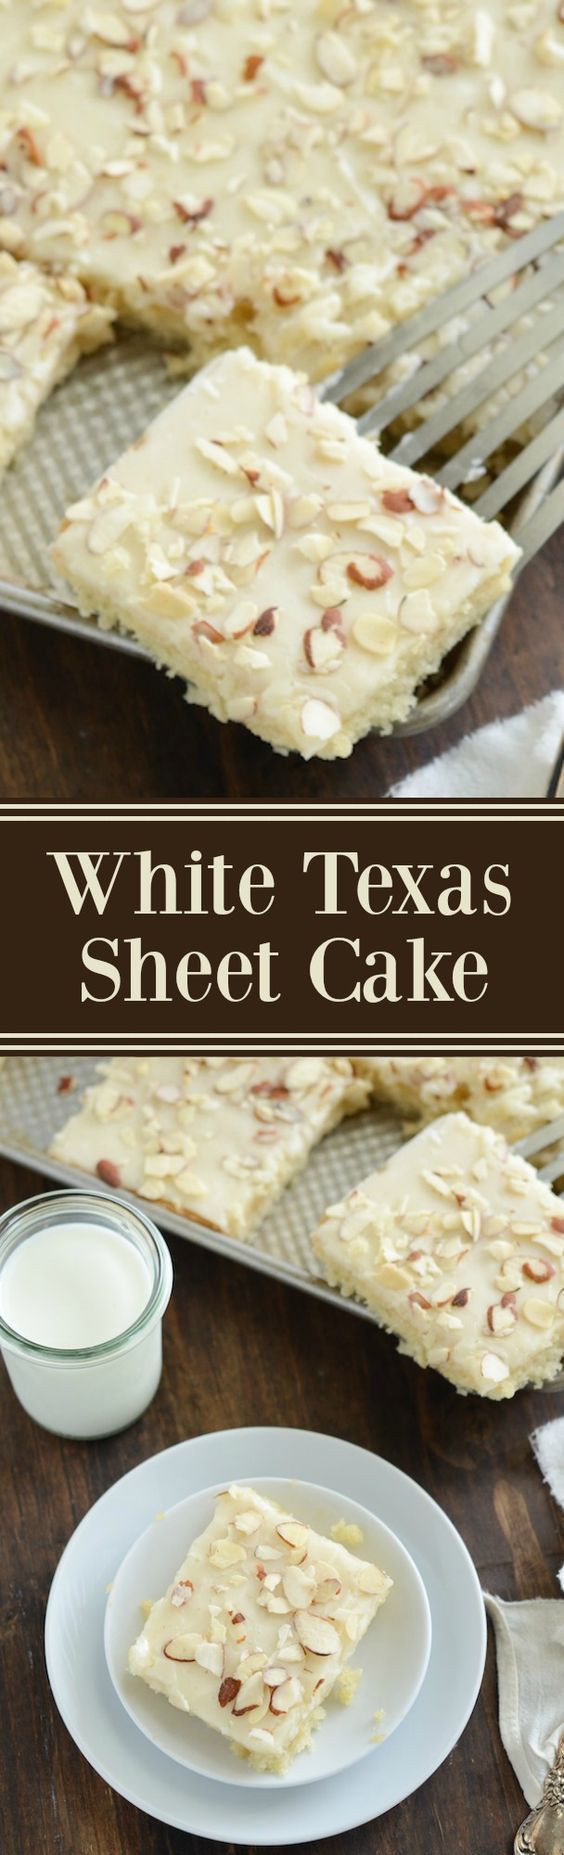 White Texas Almond Sheet Cake Dessert Recipe via The Novice Chef – This perfect buttery cake only takes 30 minutes from start to